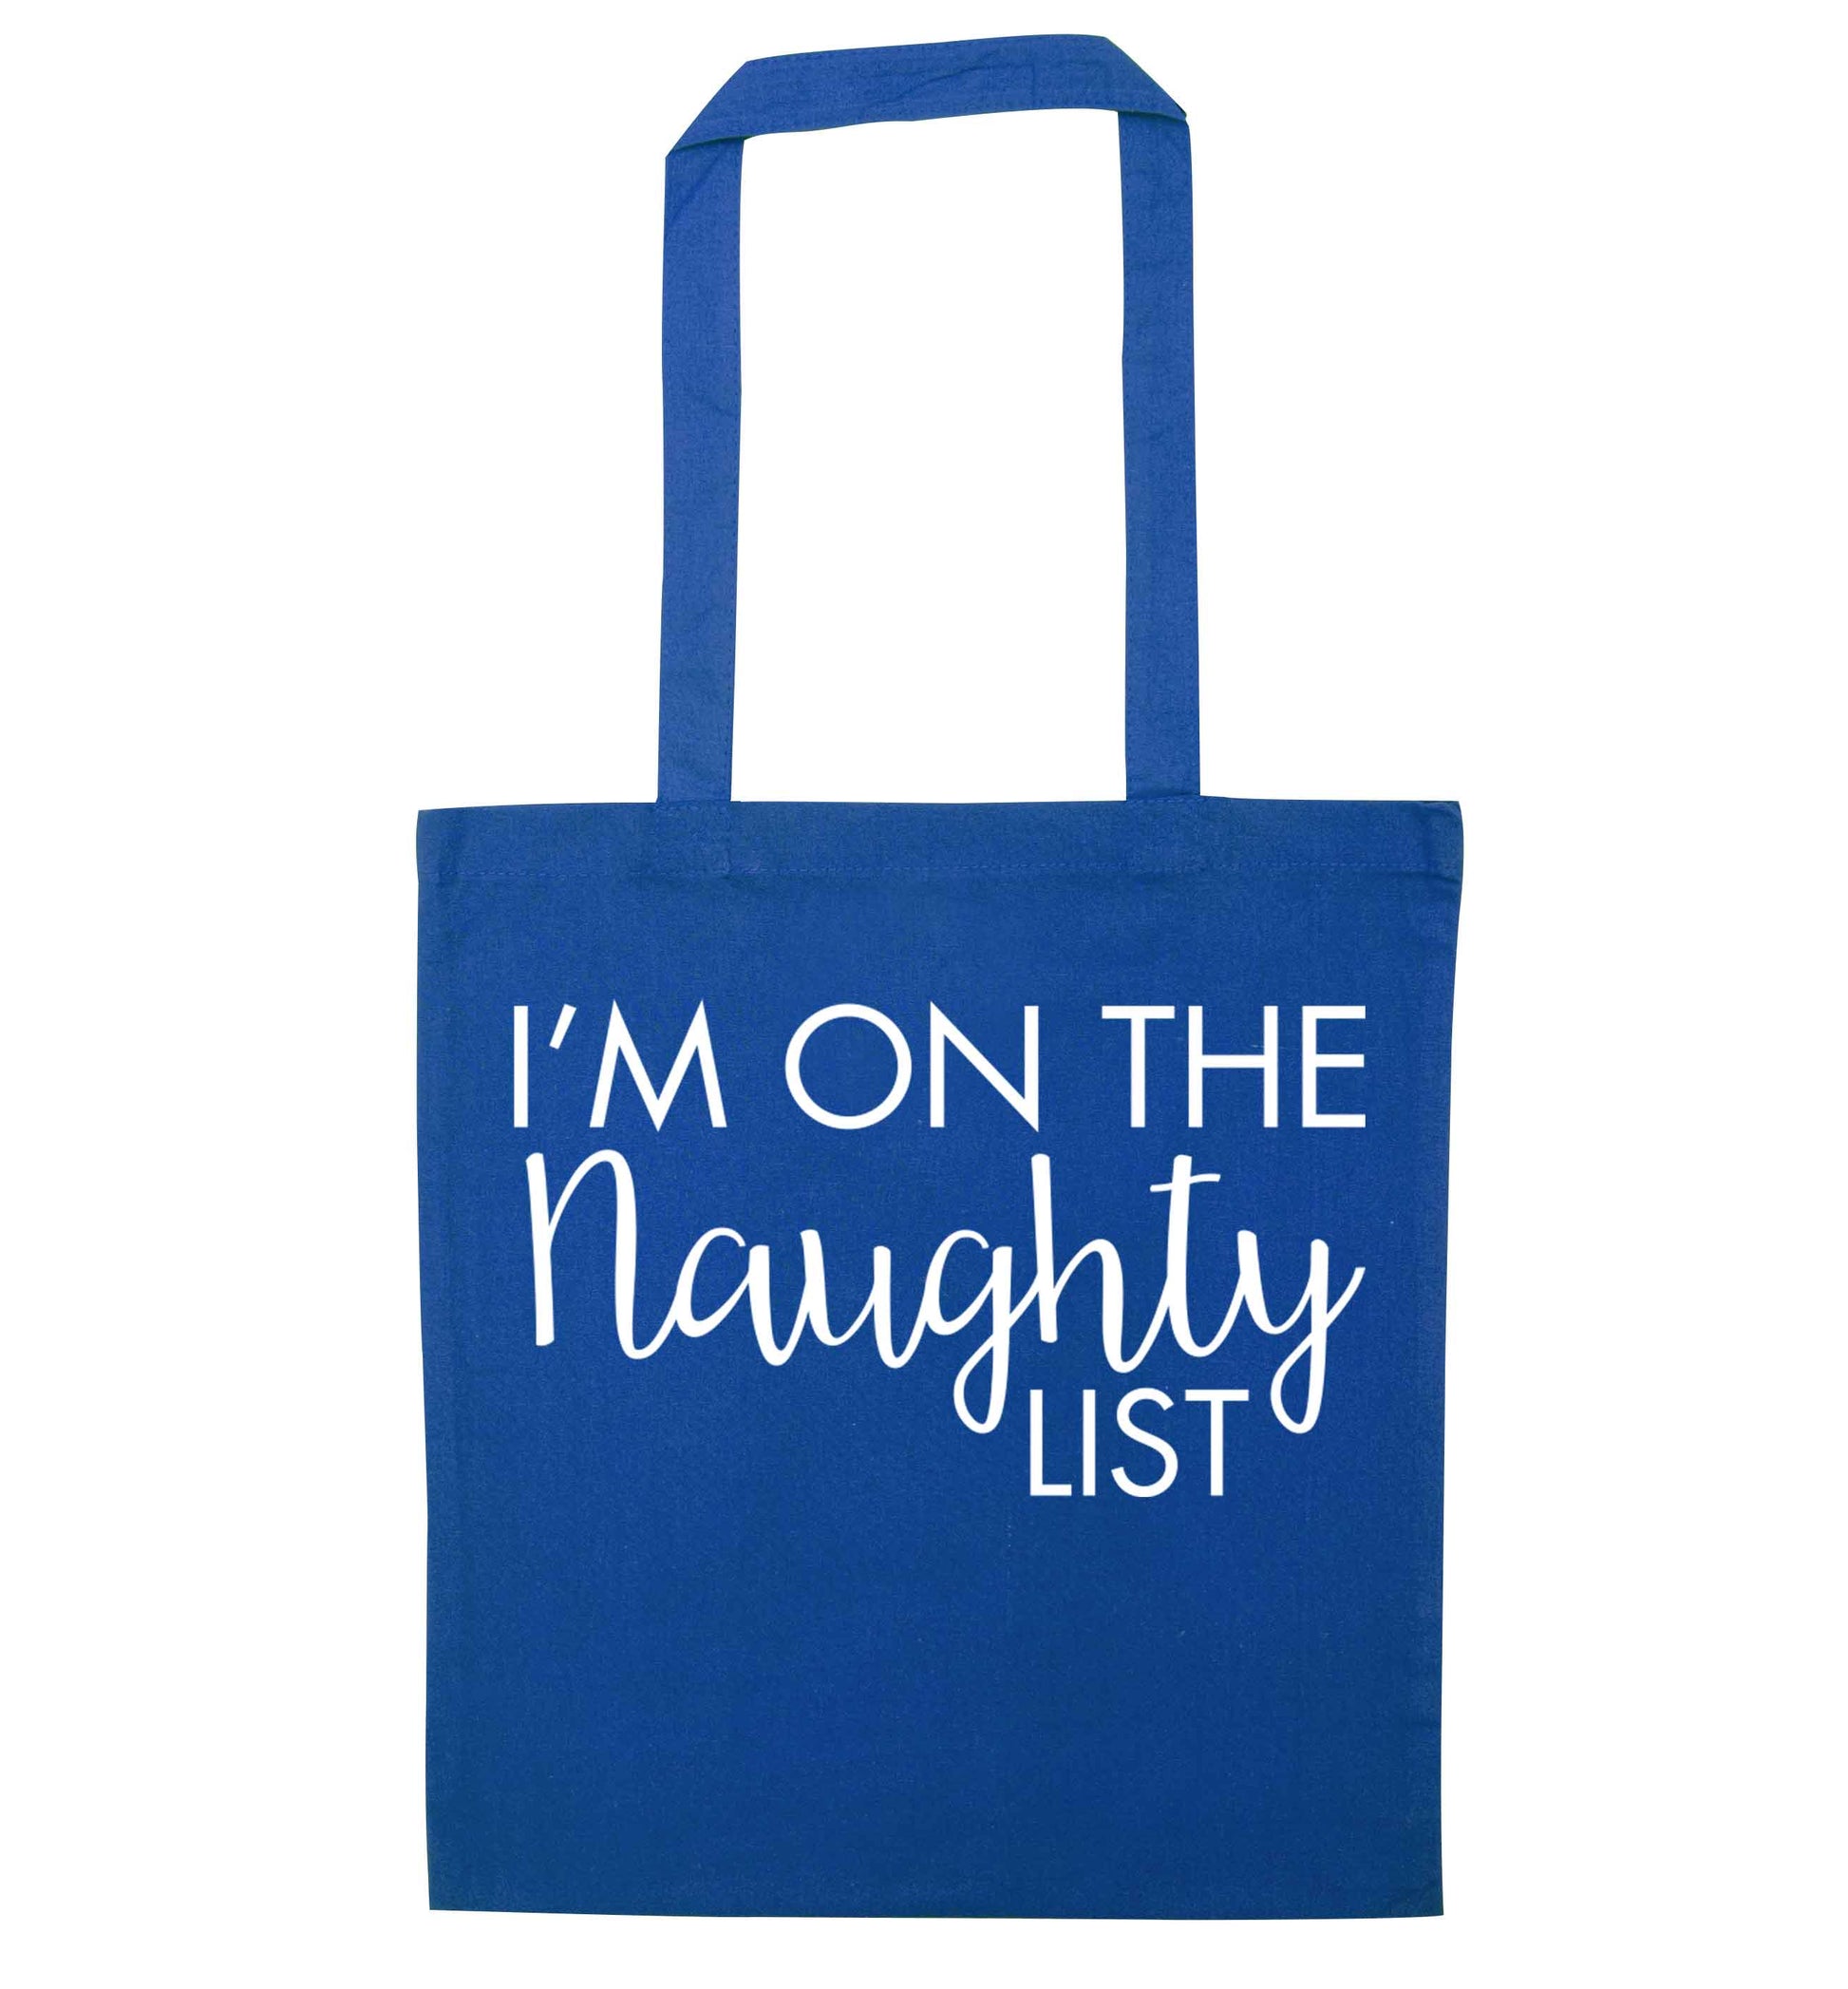 I'm on the naughty list blue tote bag